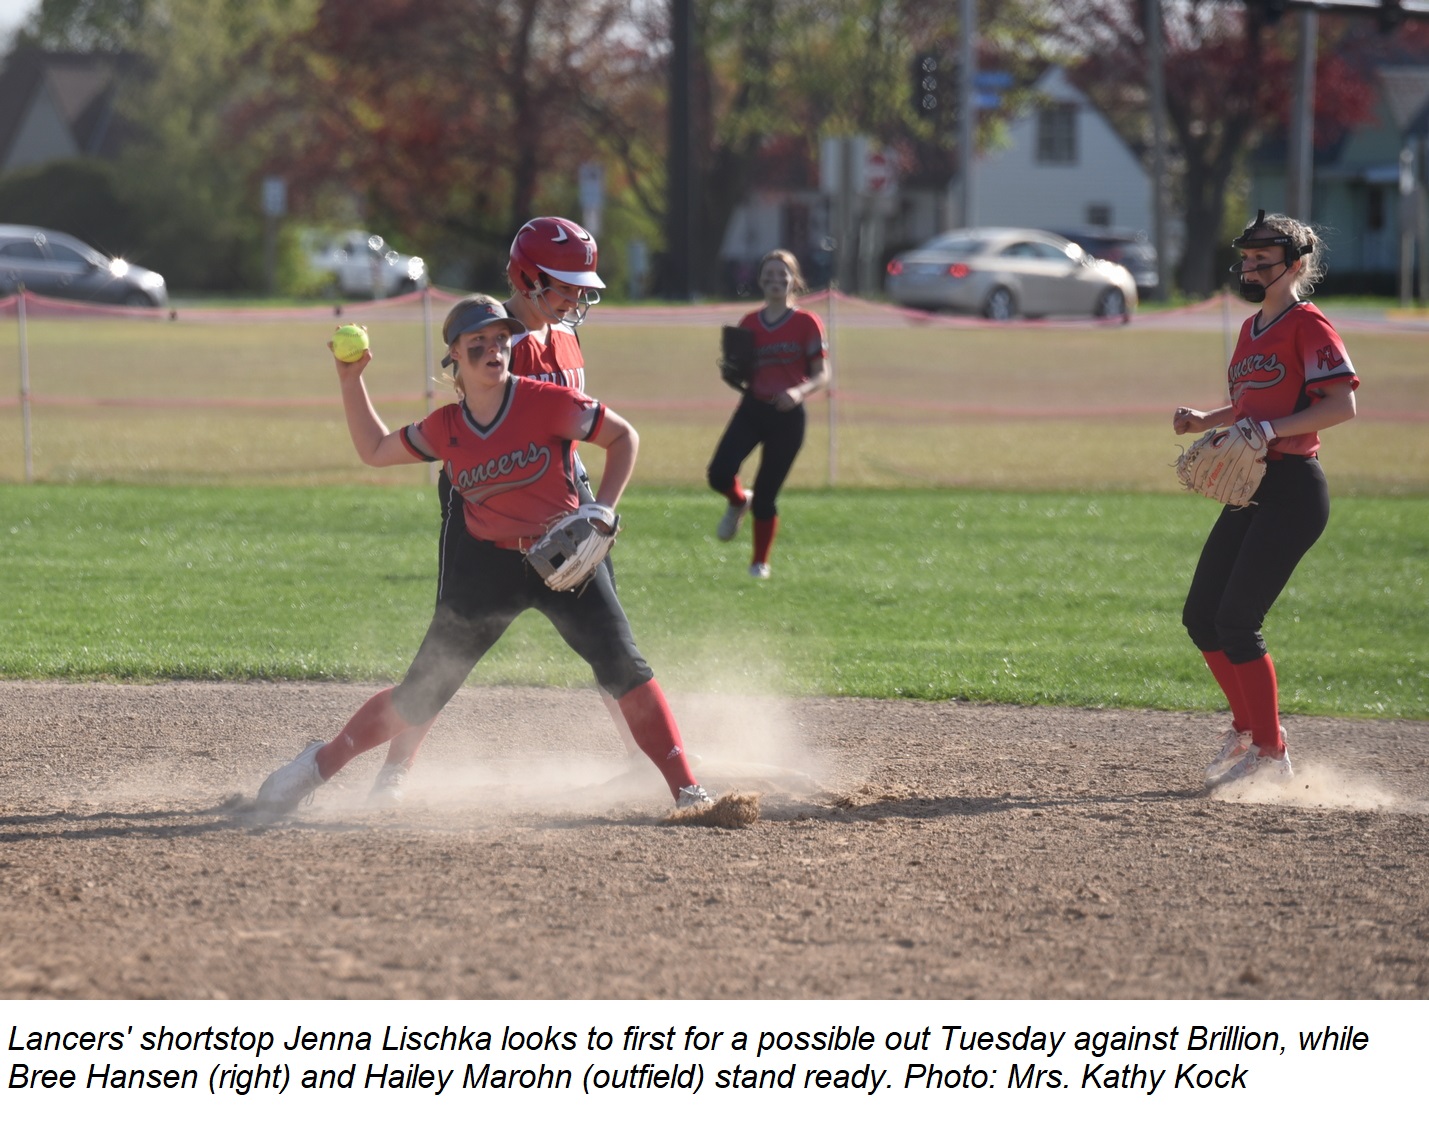 Shortstop Jenna Lischka looks to first for a potential out during the game against Brillion Tuesday. Bree Hansen and Hailey Marohn stand ready.